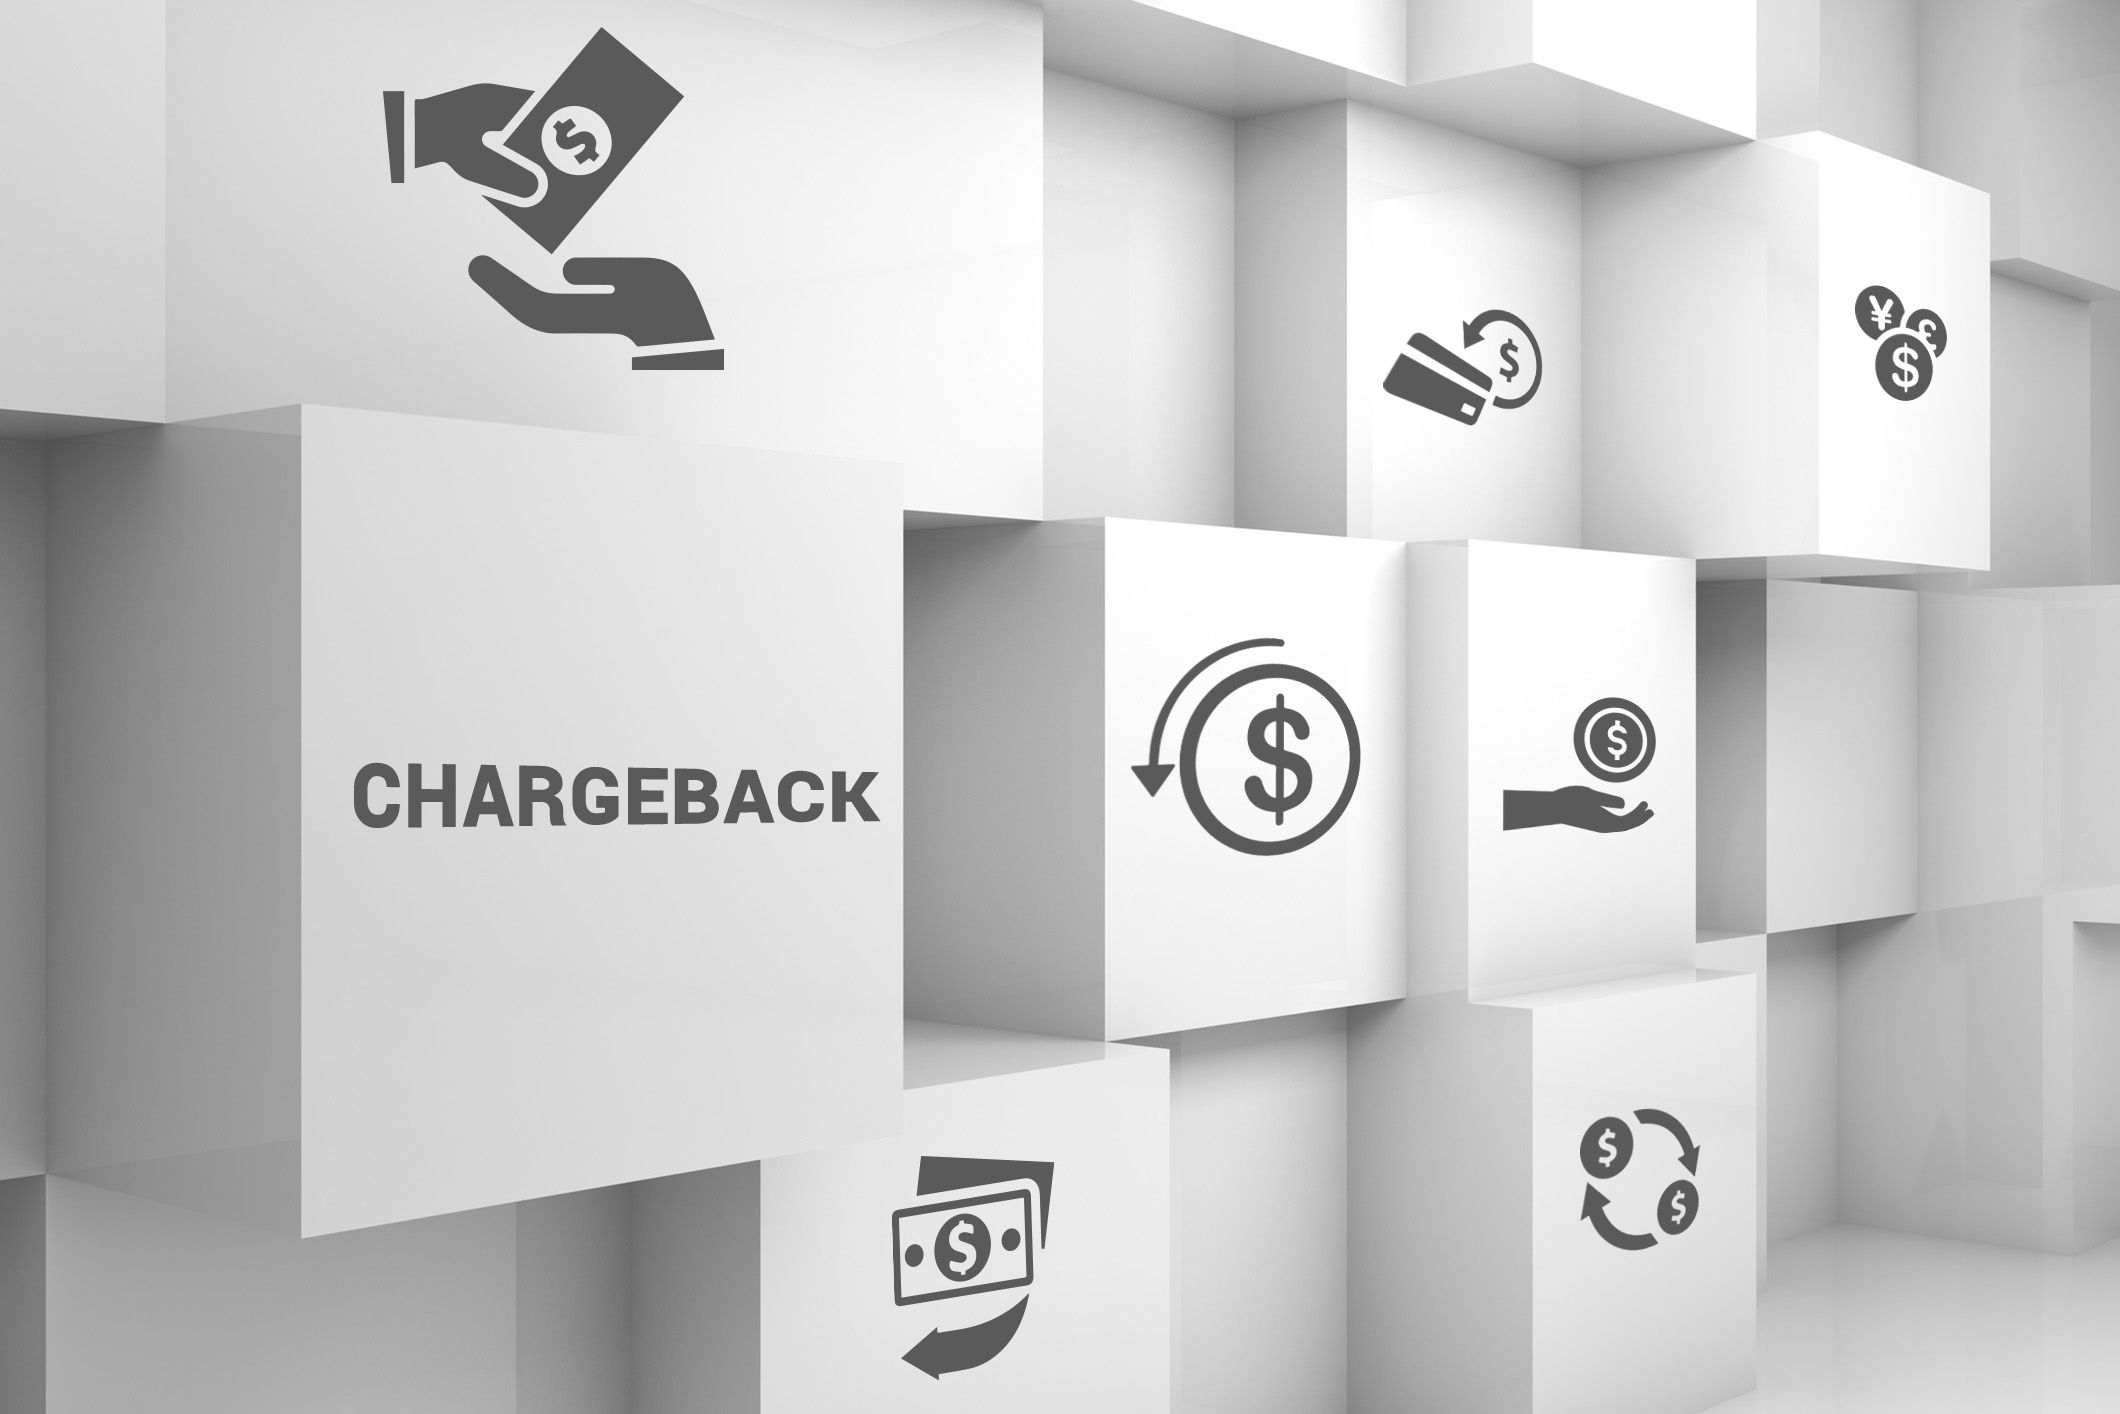 How to chargeback on onlyfans